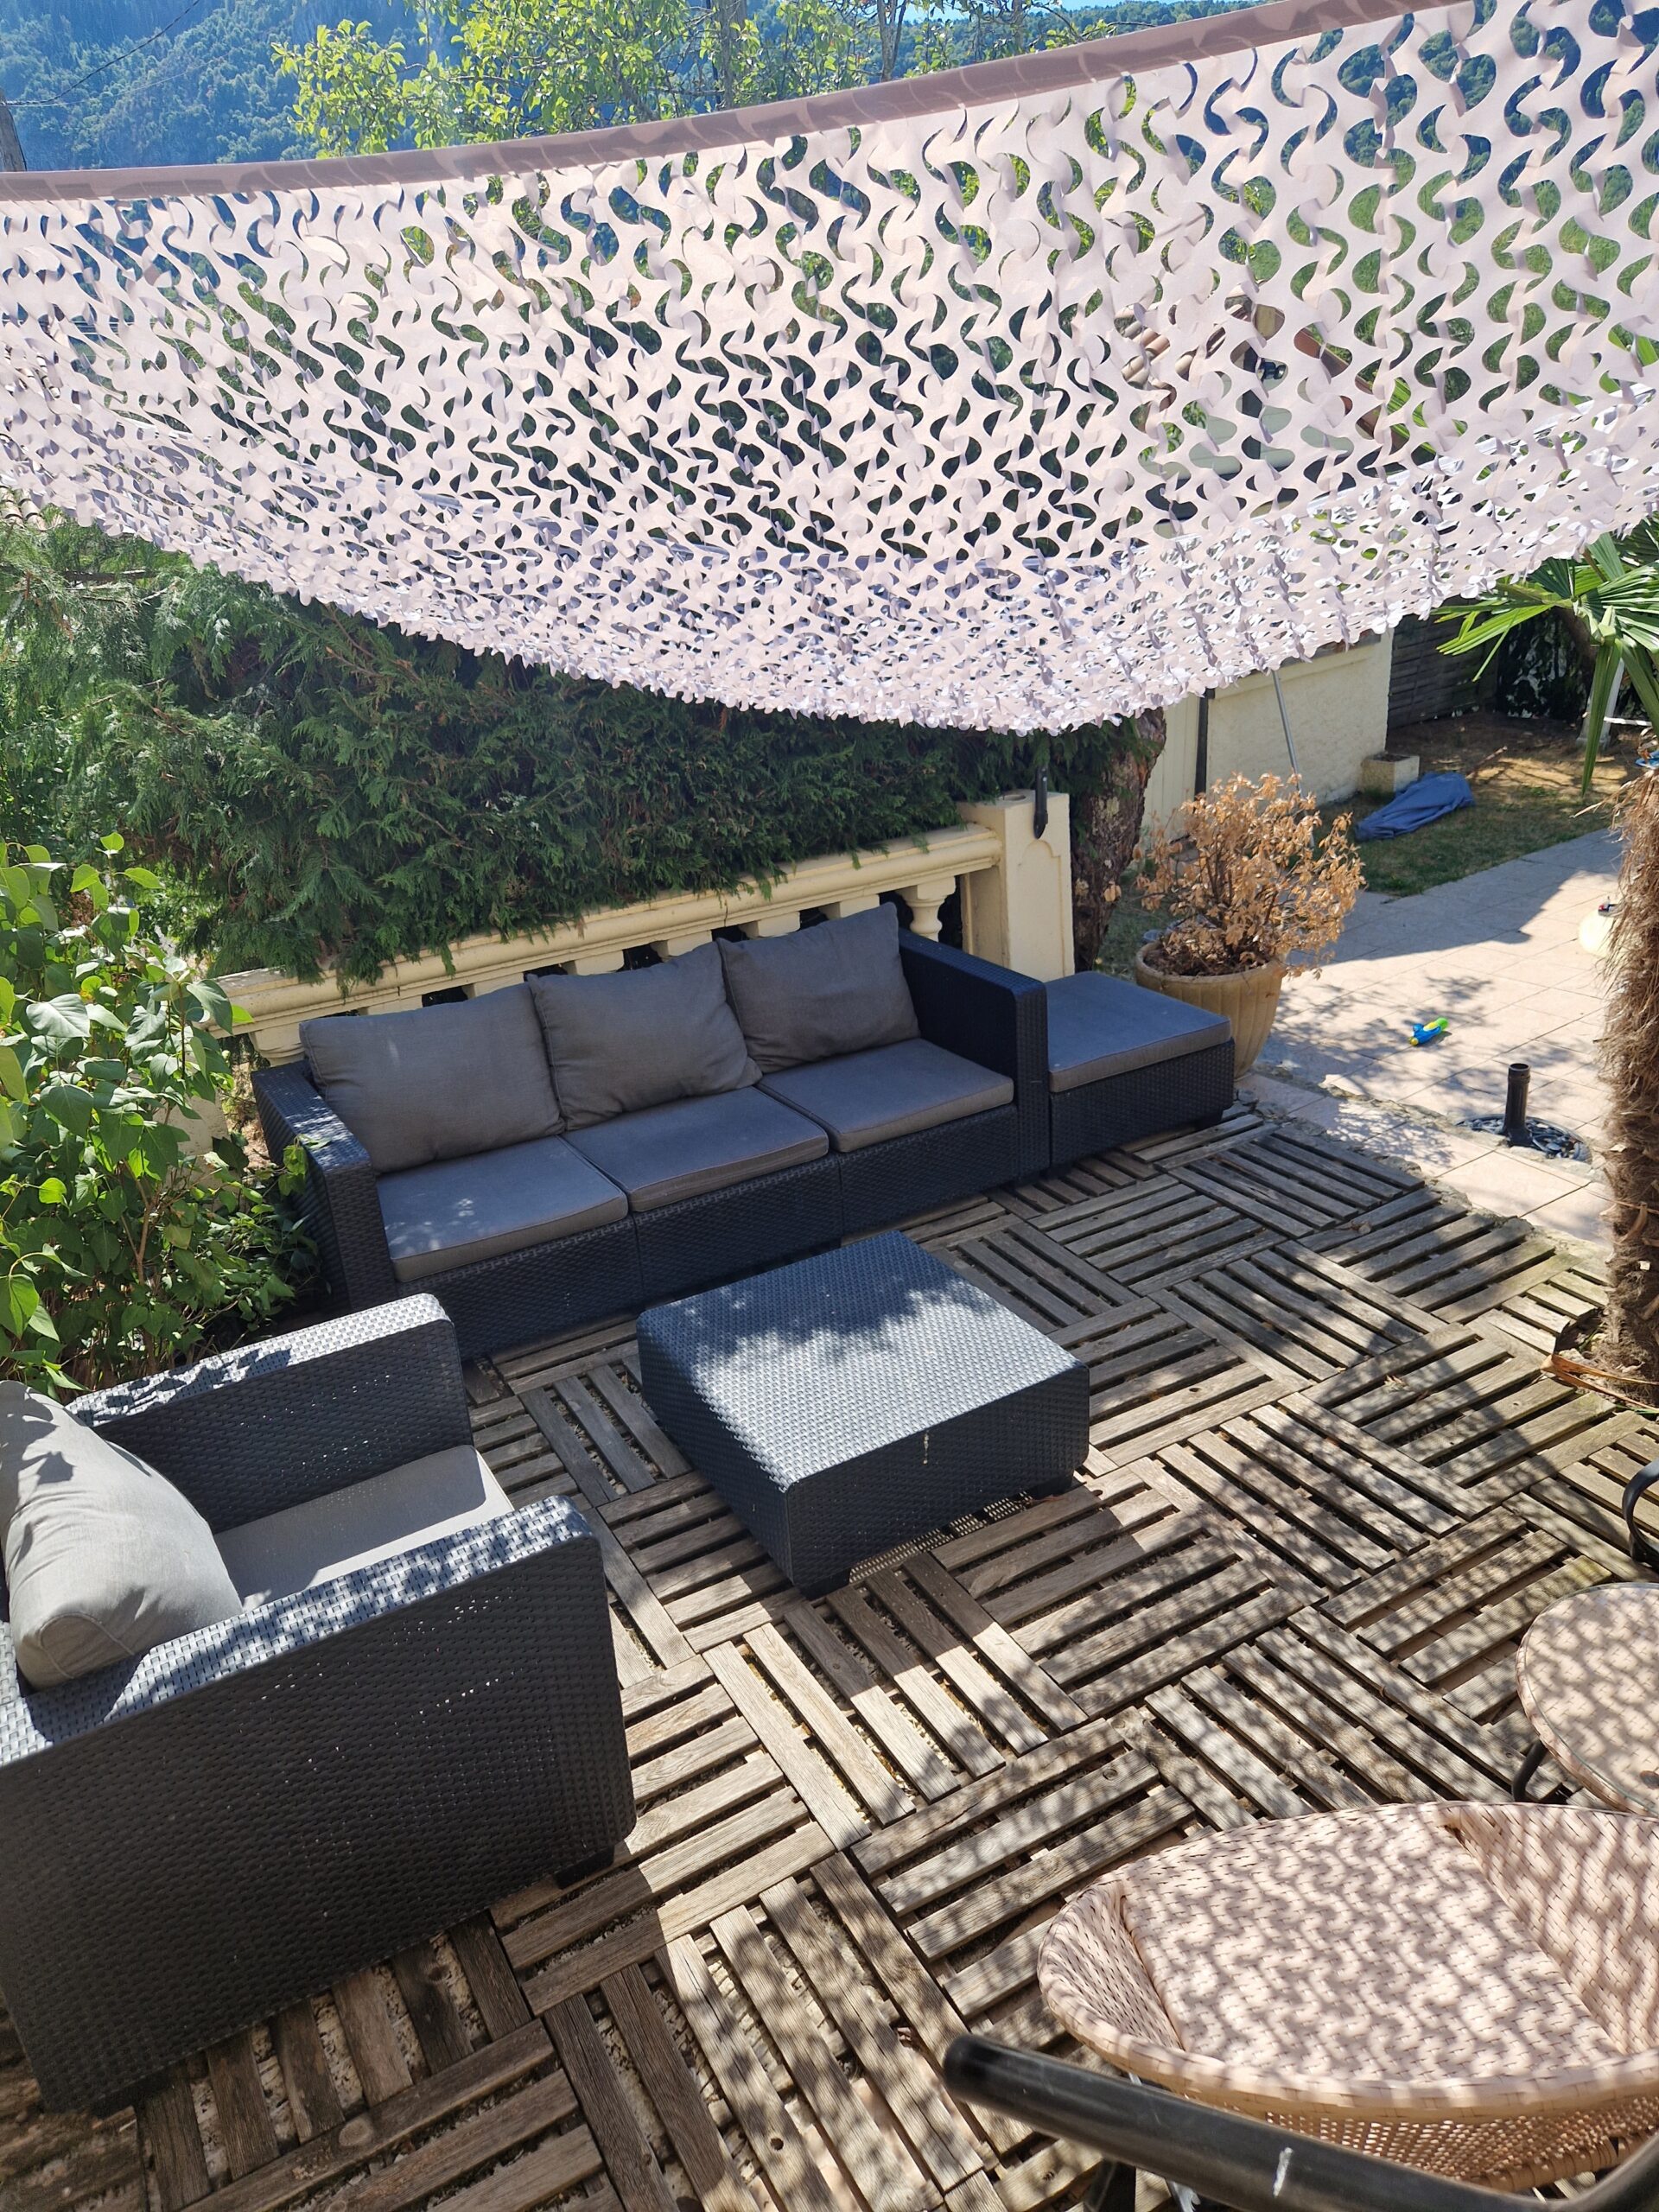 Poolside terrace with outdoor furniture with camo sun shade